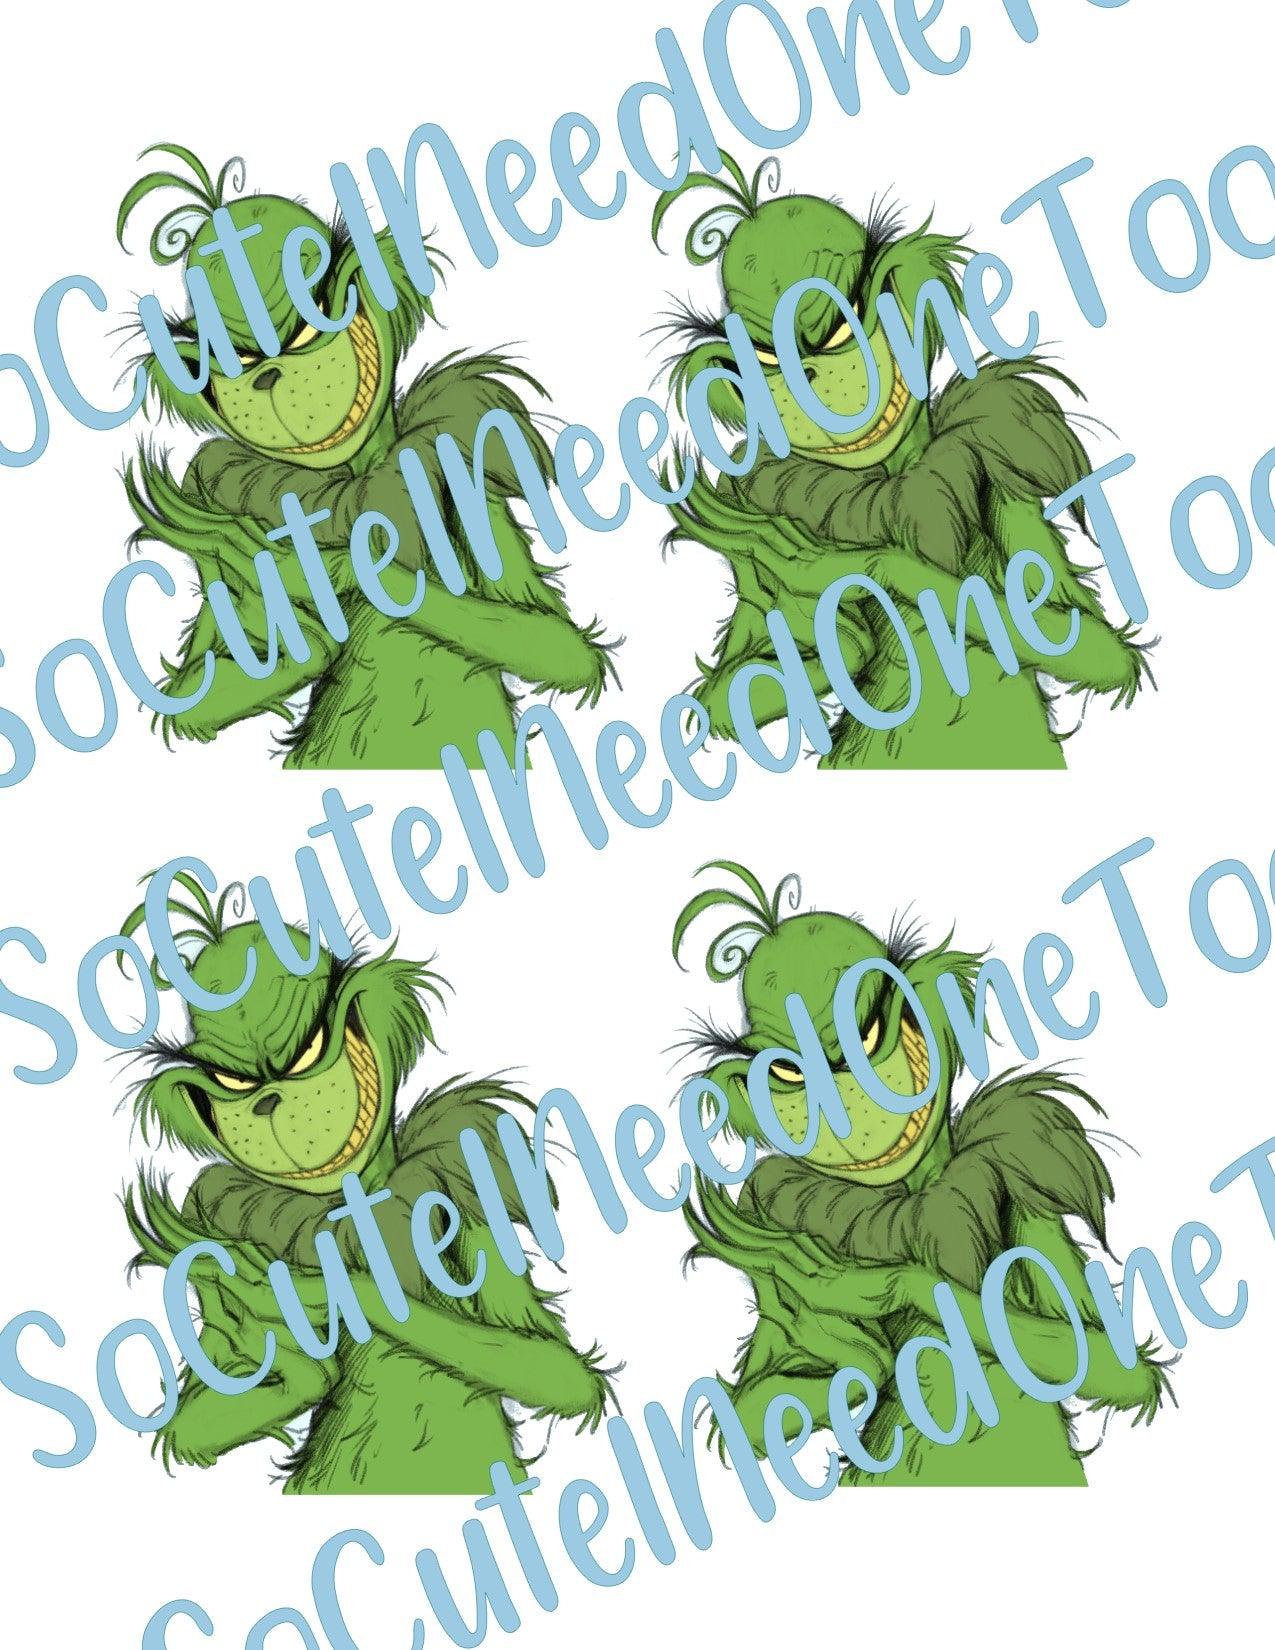 Grinch Mean Looking On Clear/White Waterslide Paper Ready To Use - SoCuteINeedOneToo